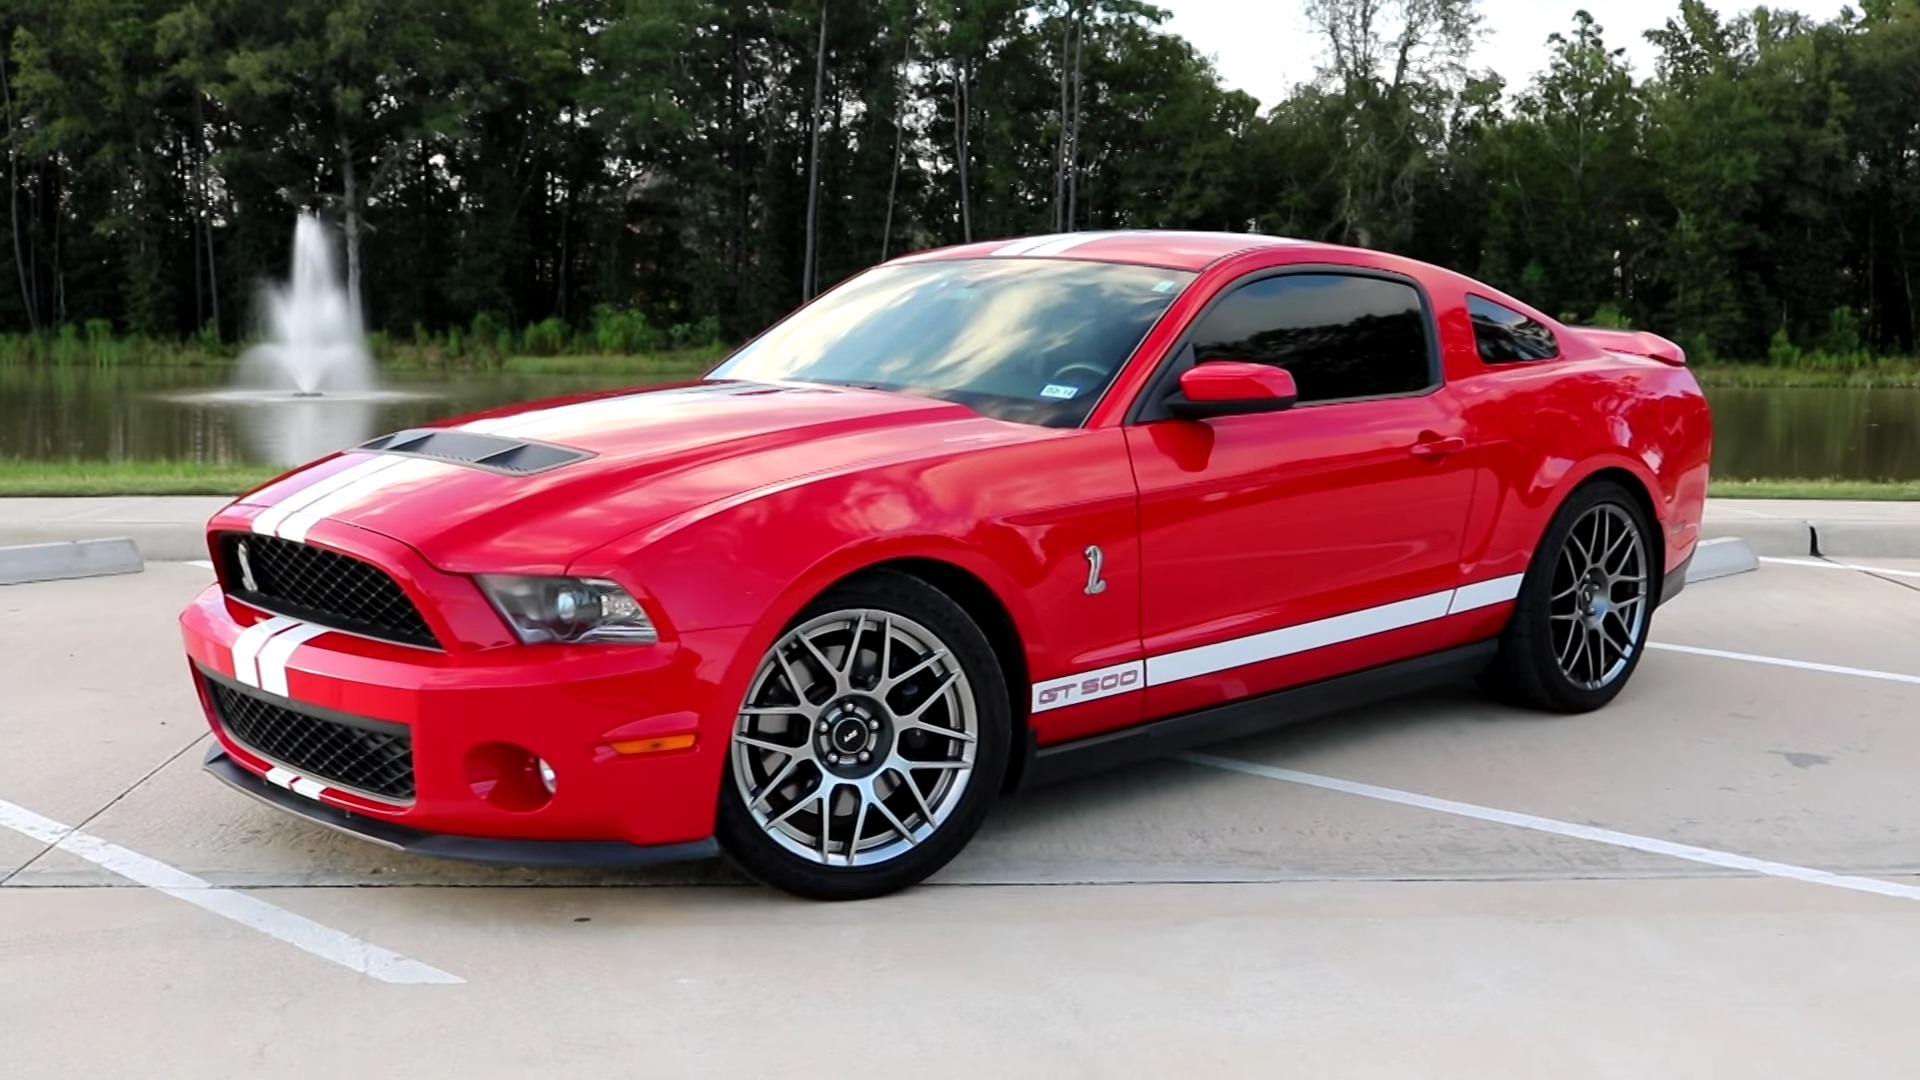 Video: A Camaro Owner Reviews The 2011 Ford Mustang Shelby GT500